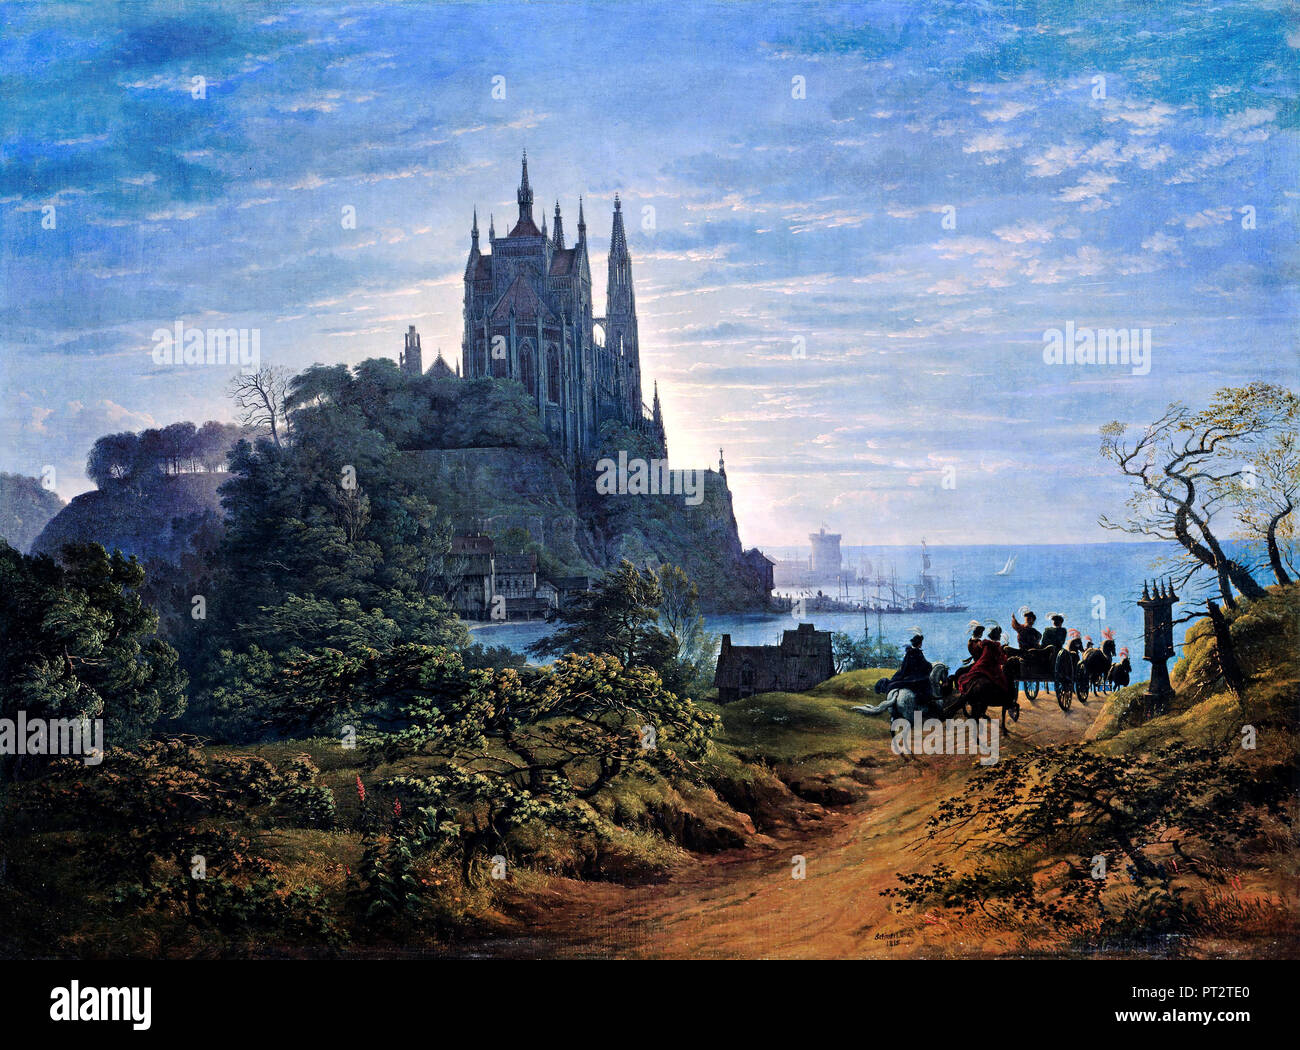 Karl Friedrich Schinkel, Gothic Church on a Rock by the Sea 1815 Oil on canvas, Alte Nationalgalerie, Berlin, Germany. Stock Photo